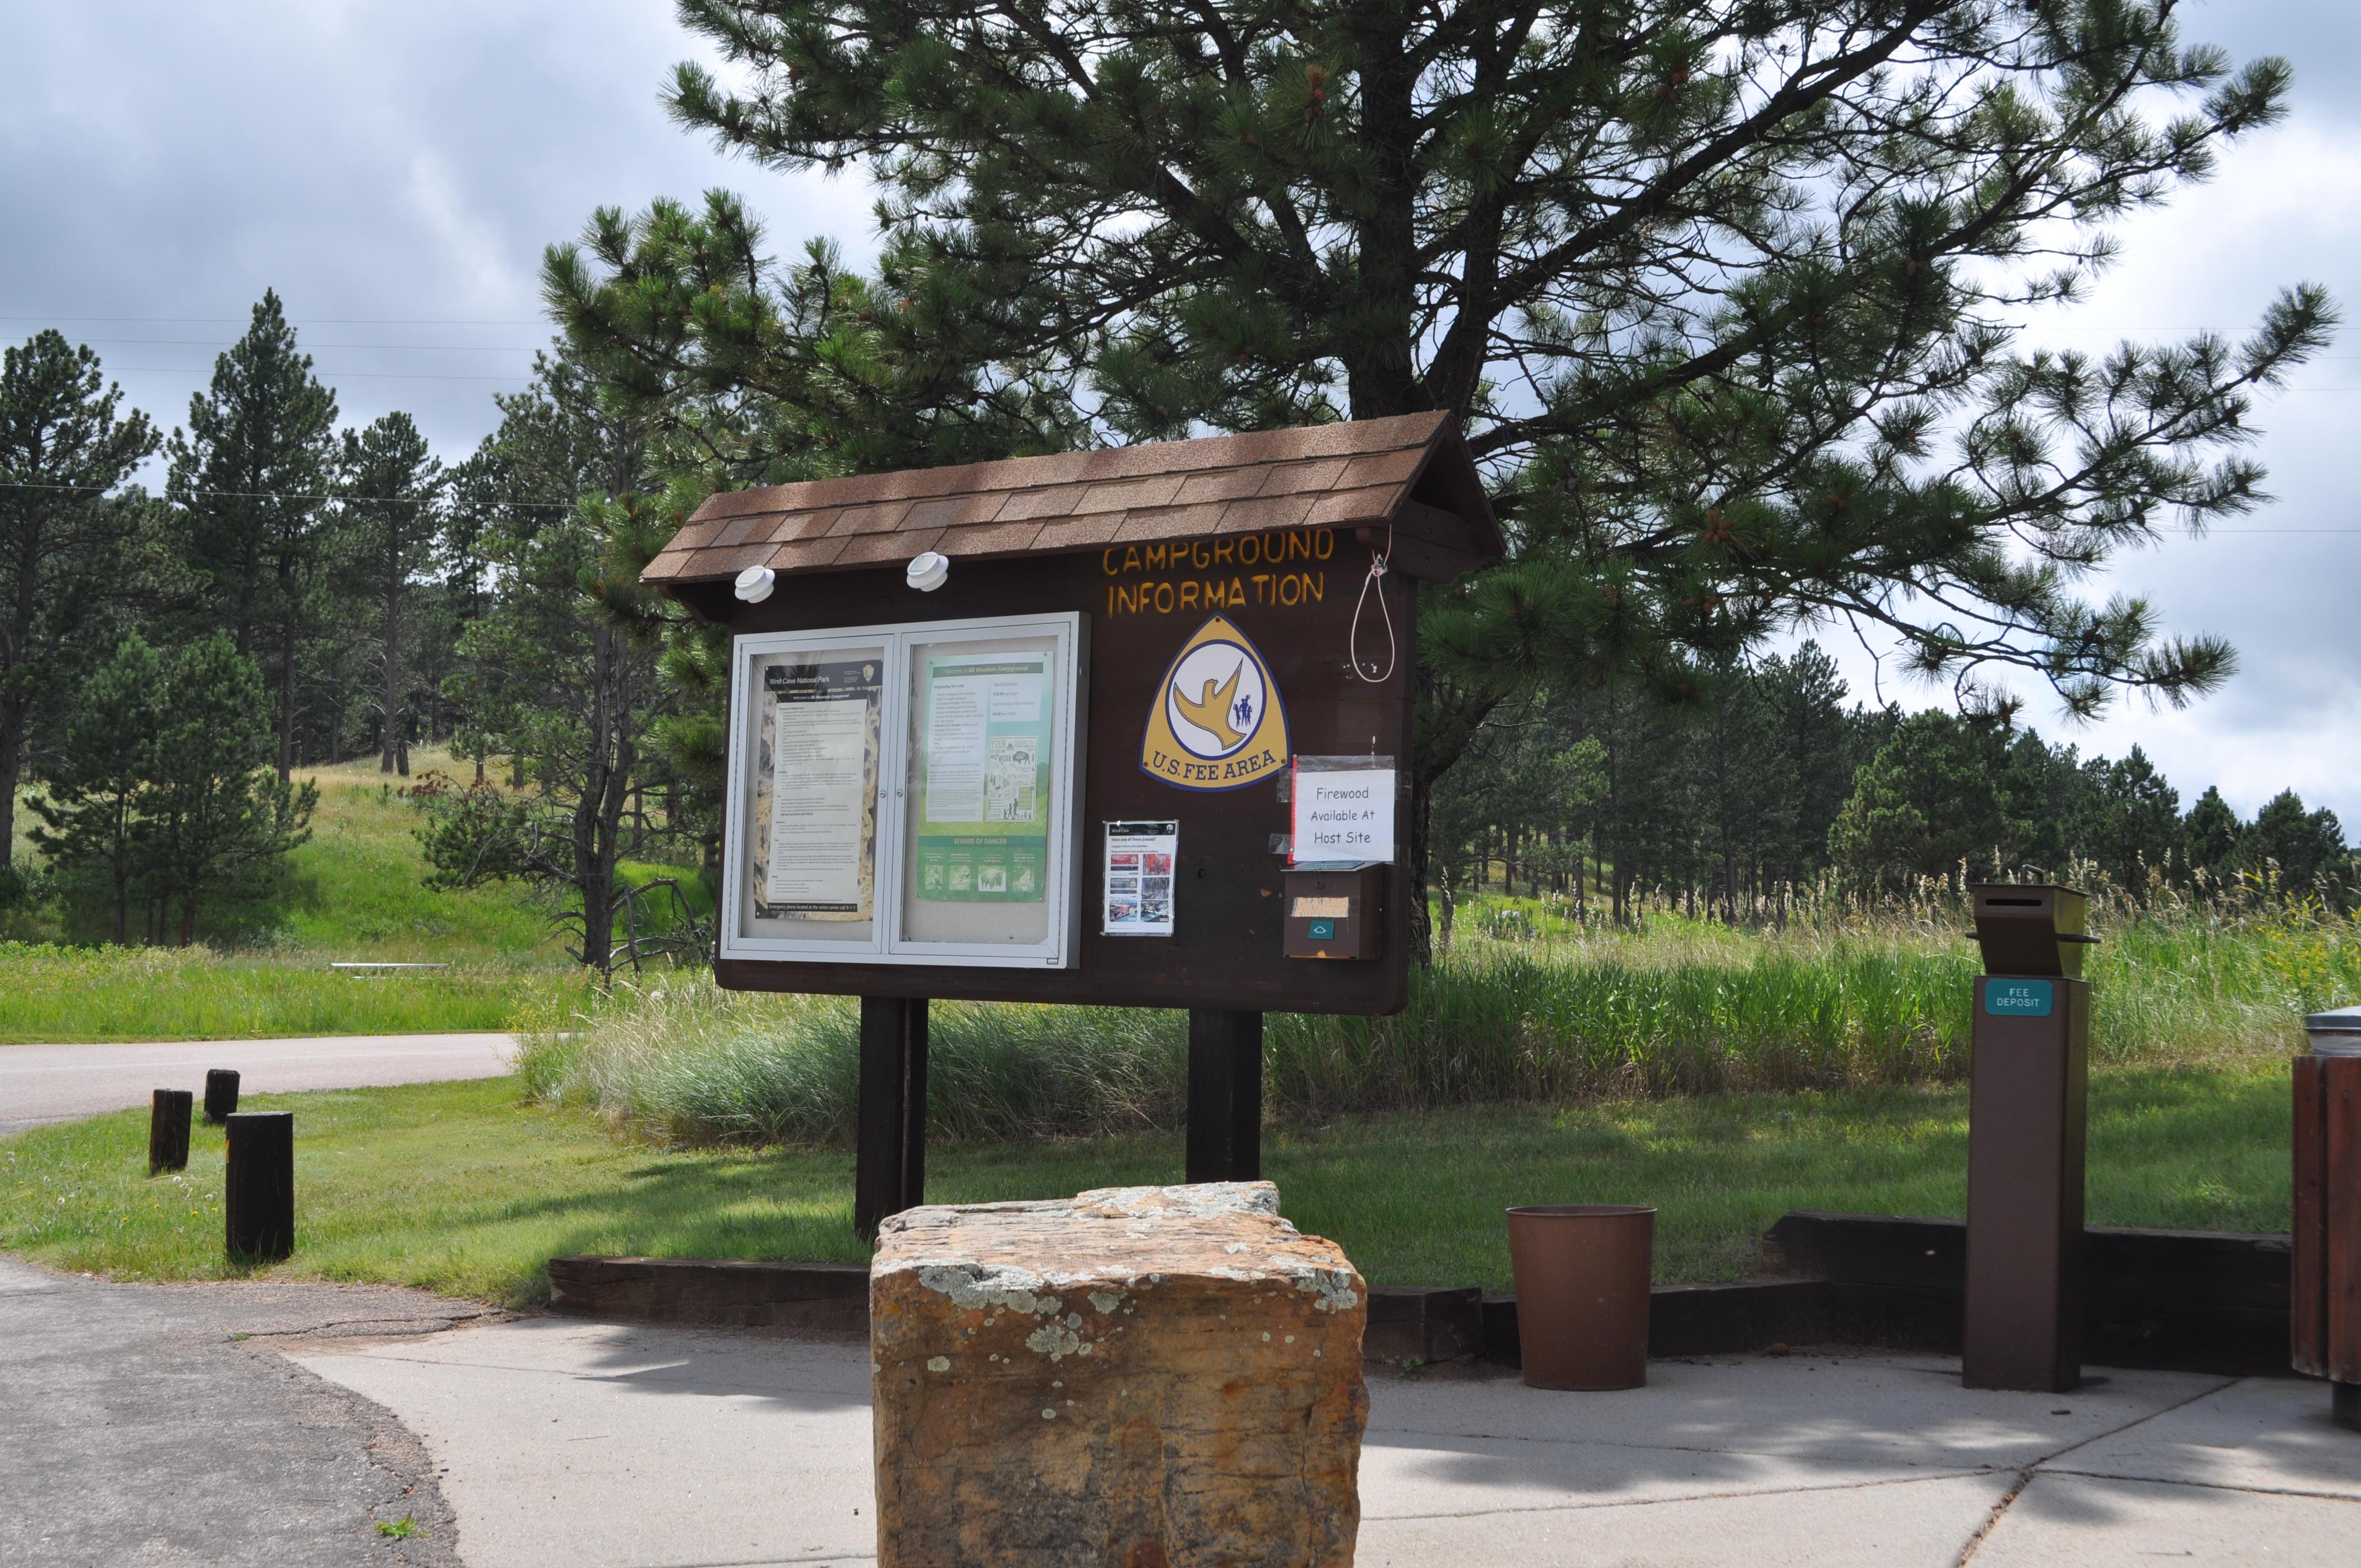 The Elk Mountain Campground reservation board with information and a drop box for cash payments.